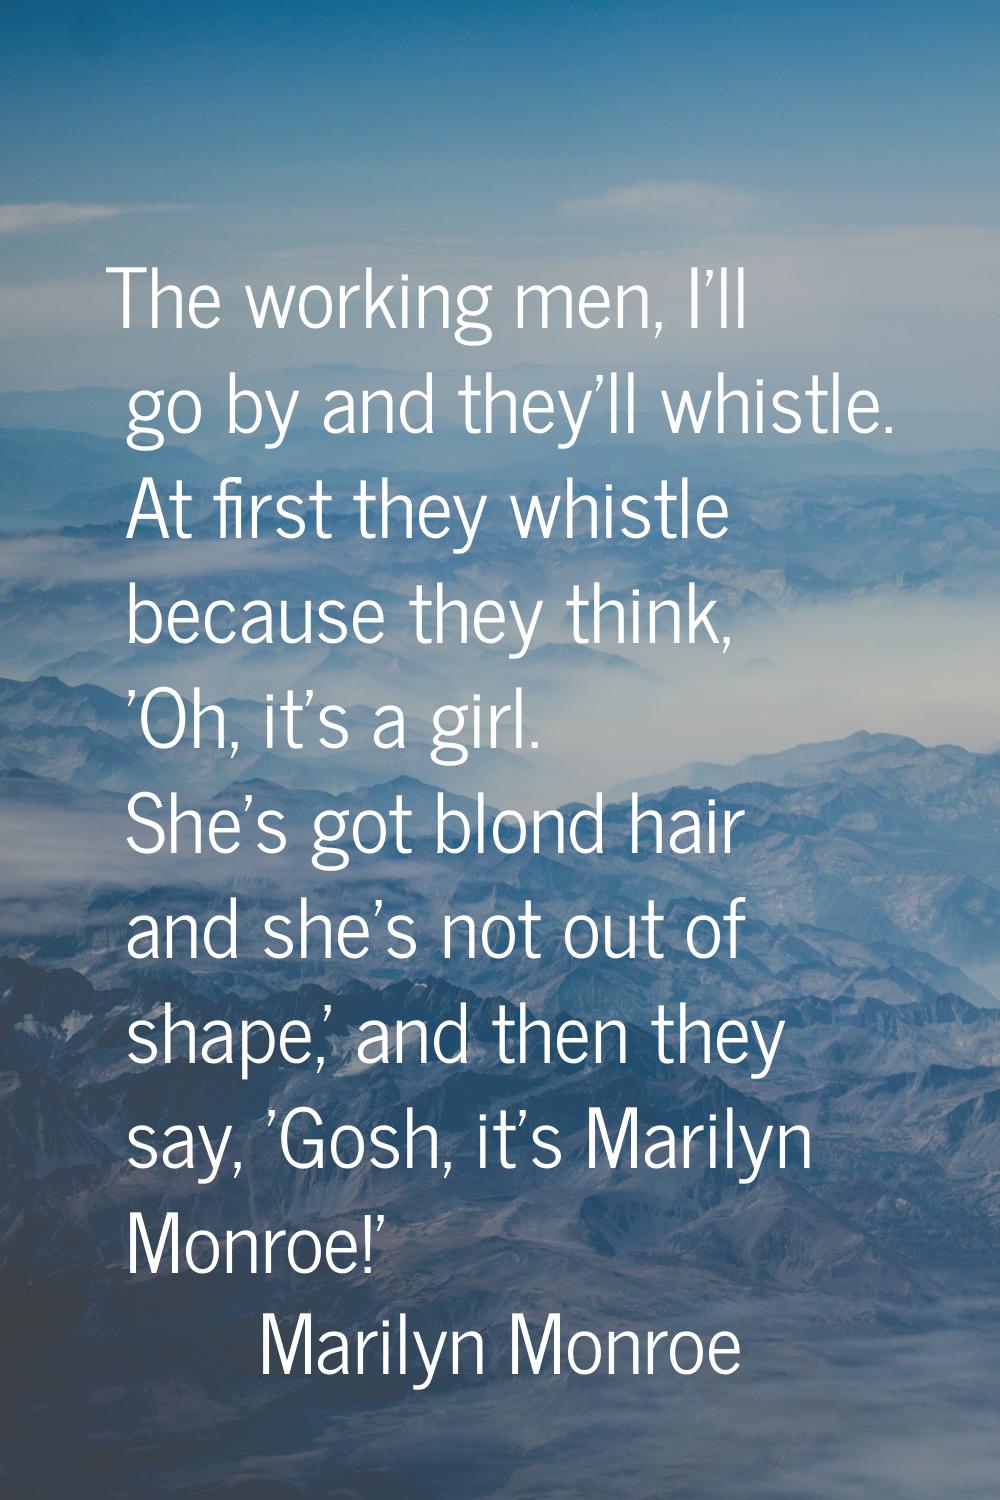 The working men, I'll go by and they'll whistle. At first they whistle because they think, 'Oh, it'